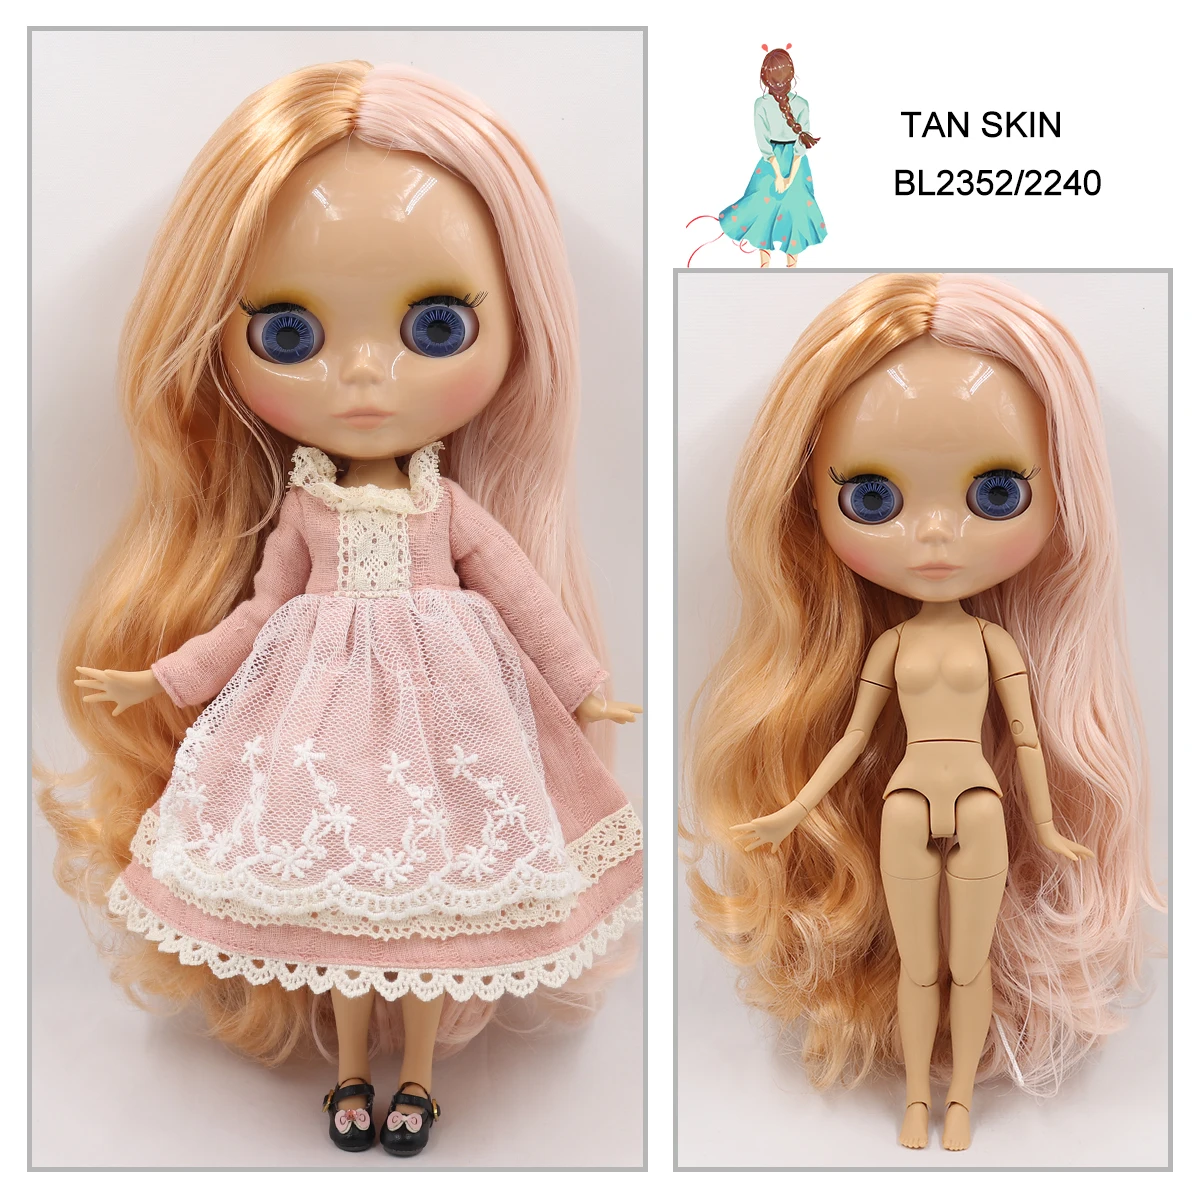 Neo Blythe Doll with Multi-Color Hair, Tan Skin, Shiny Face & Factory Jointed Body 1